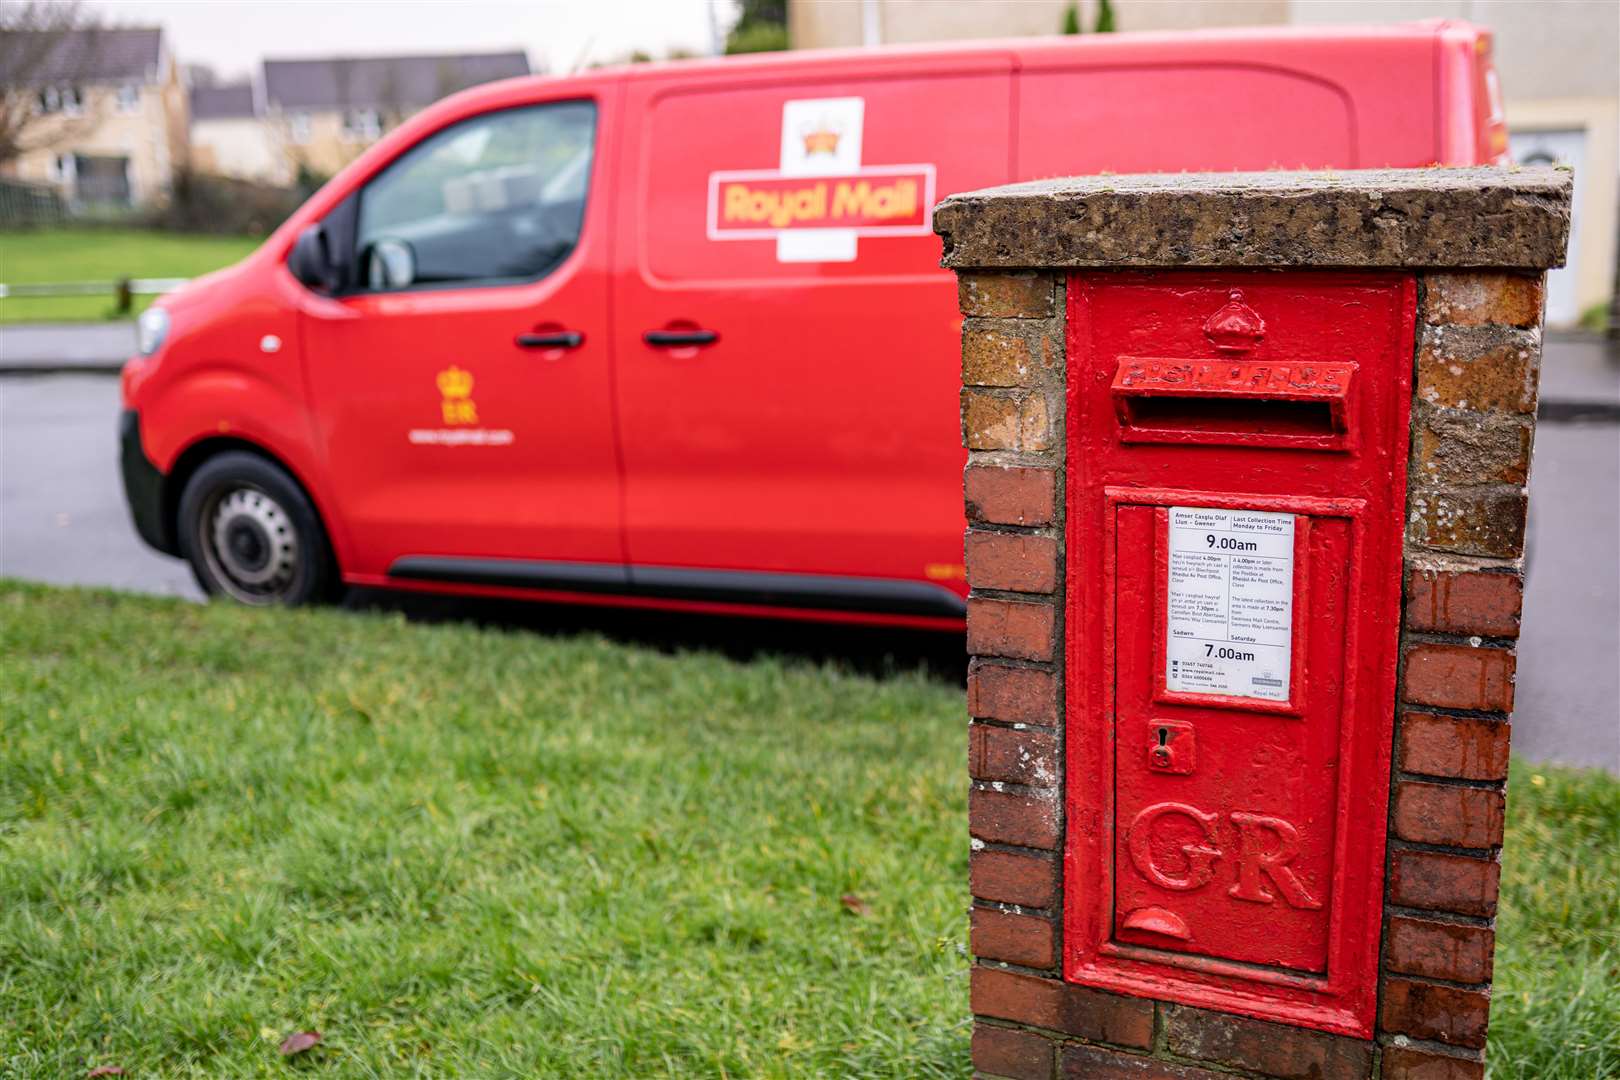 Royal Mail has responded to a Thatcham town councillors concerns